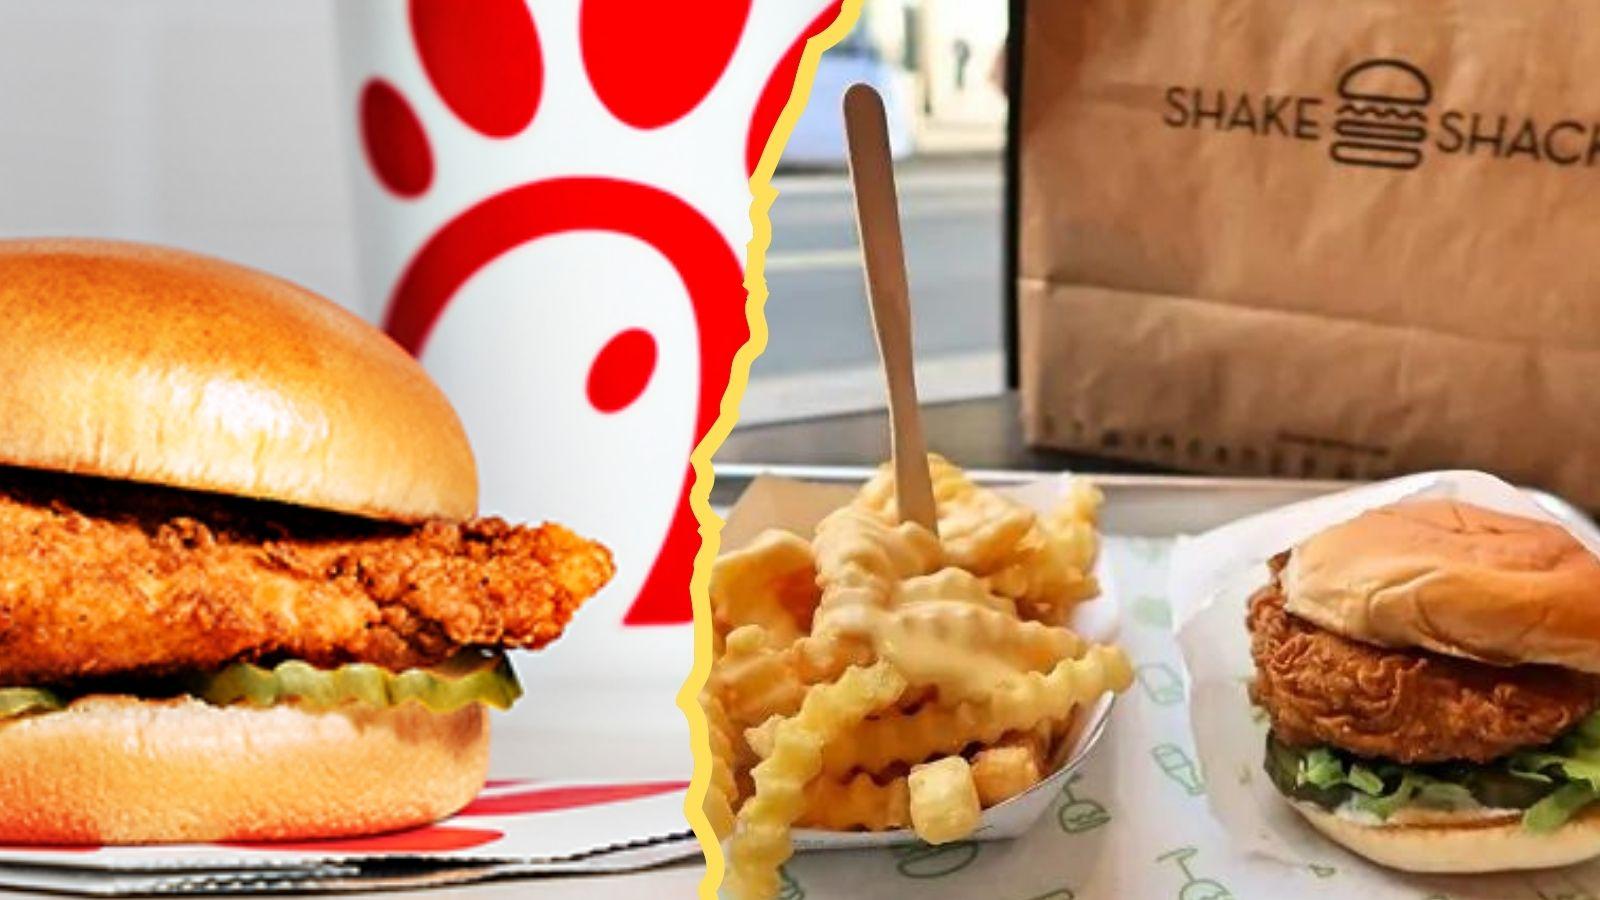 Chick fil and Shake Shack